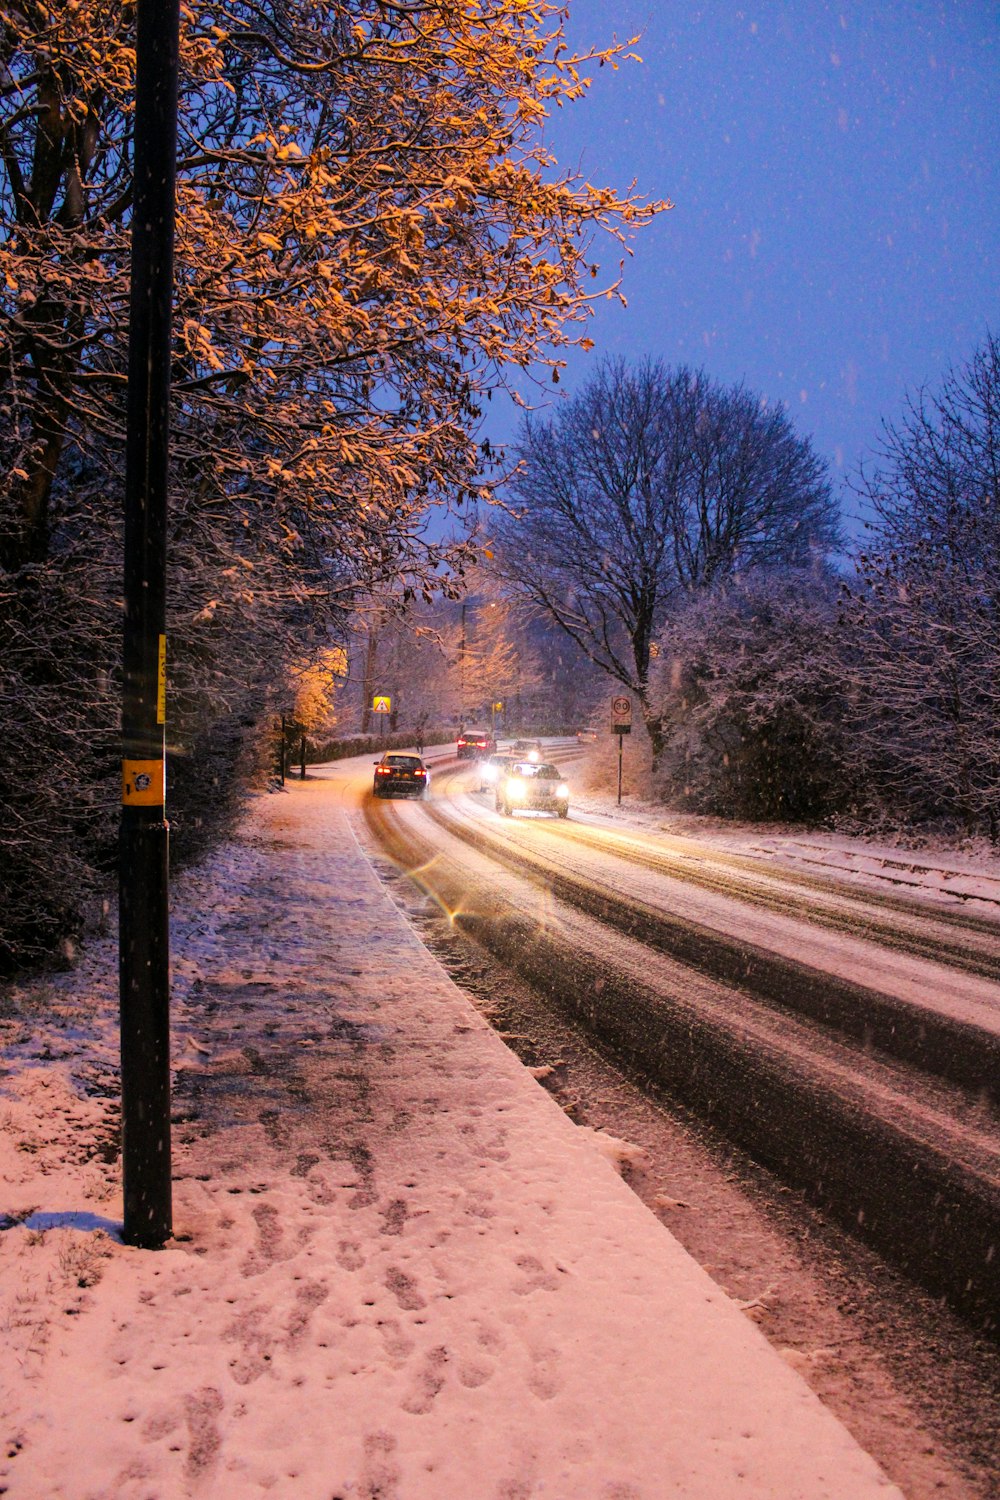 a snowy street with cars driving down it